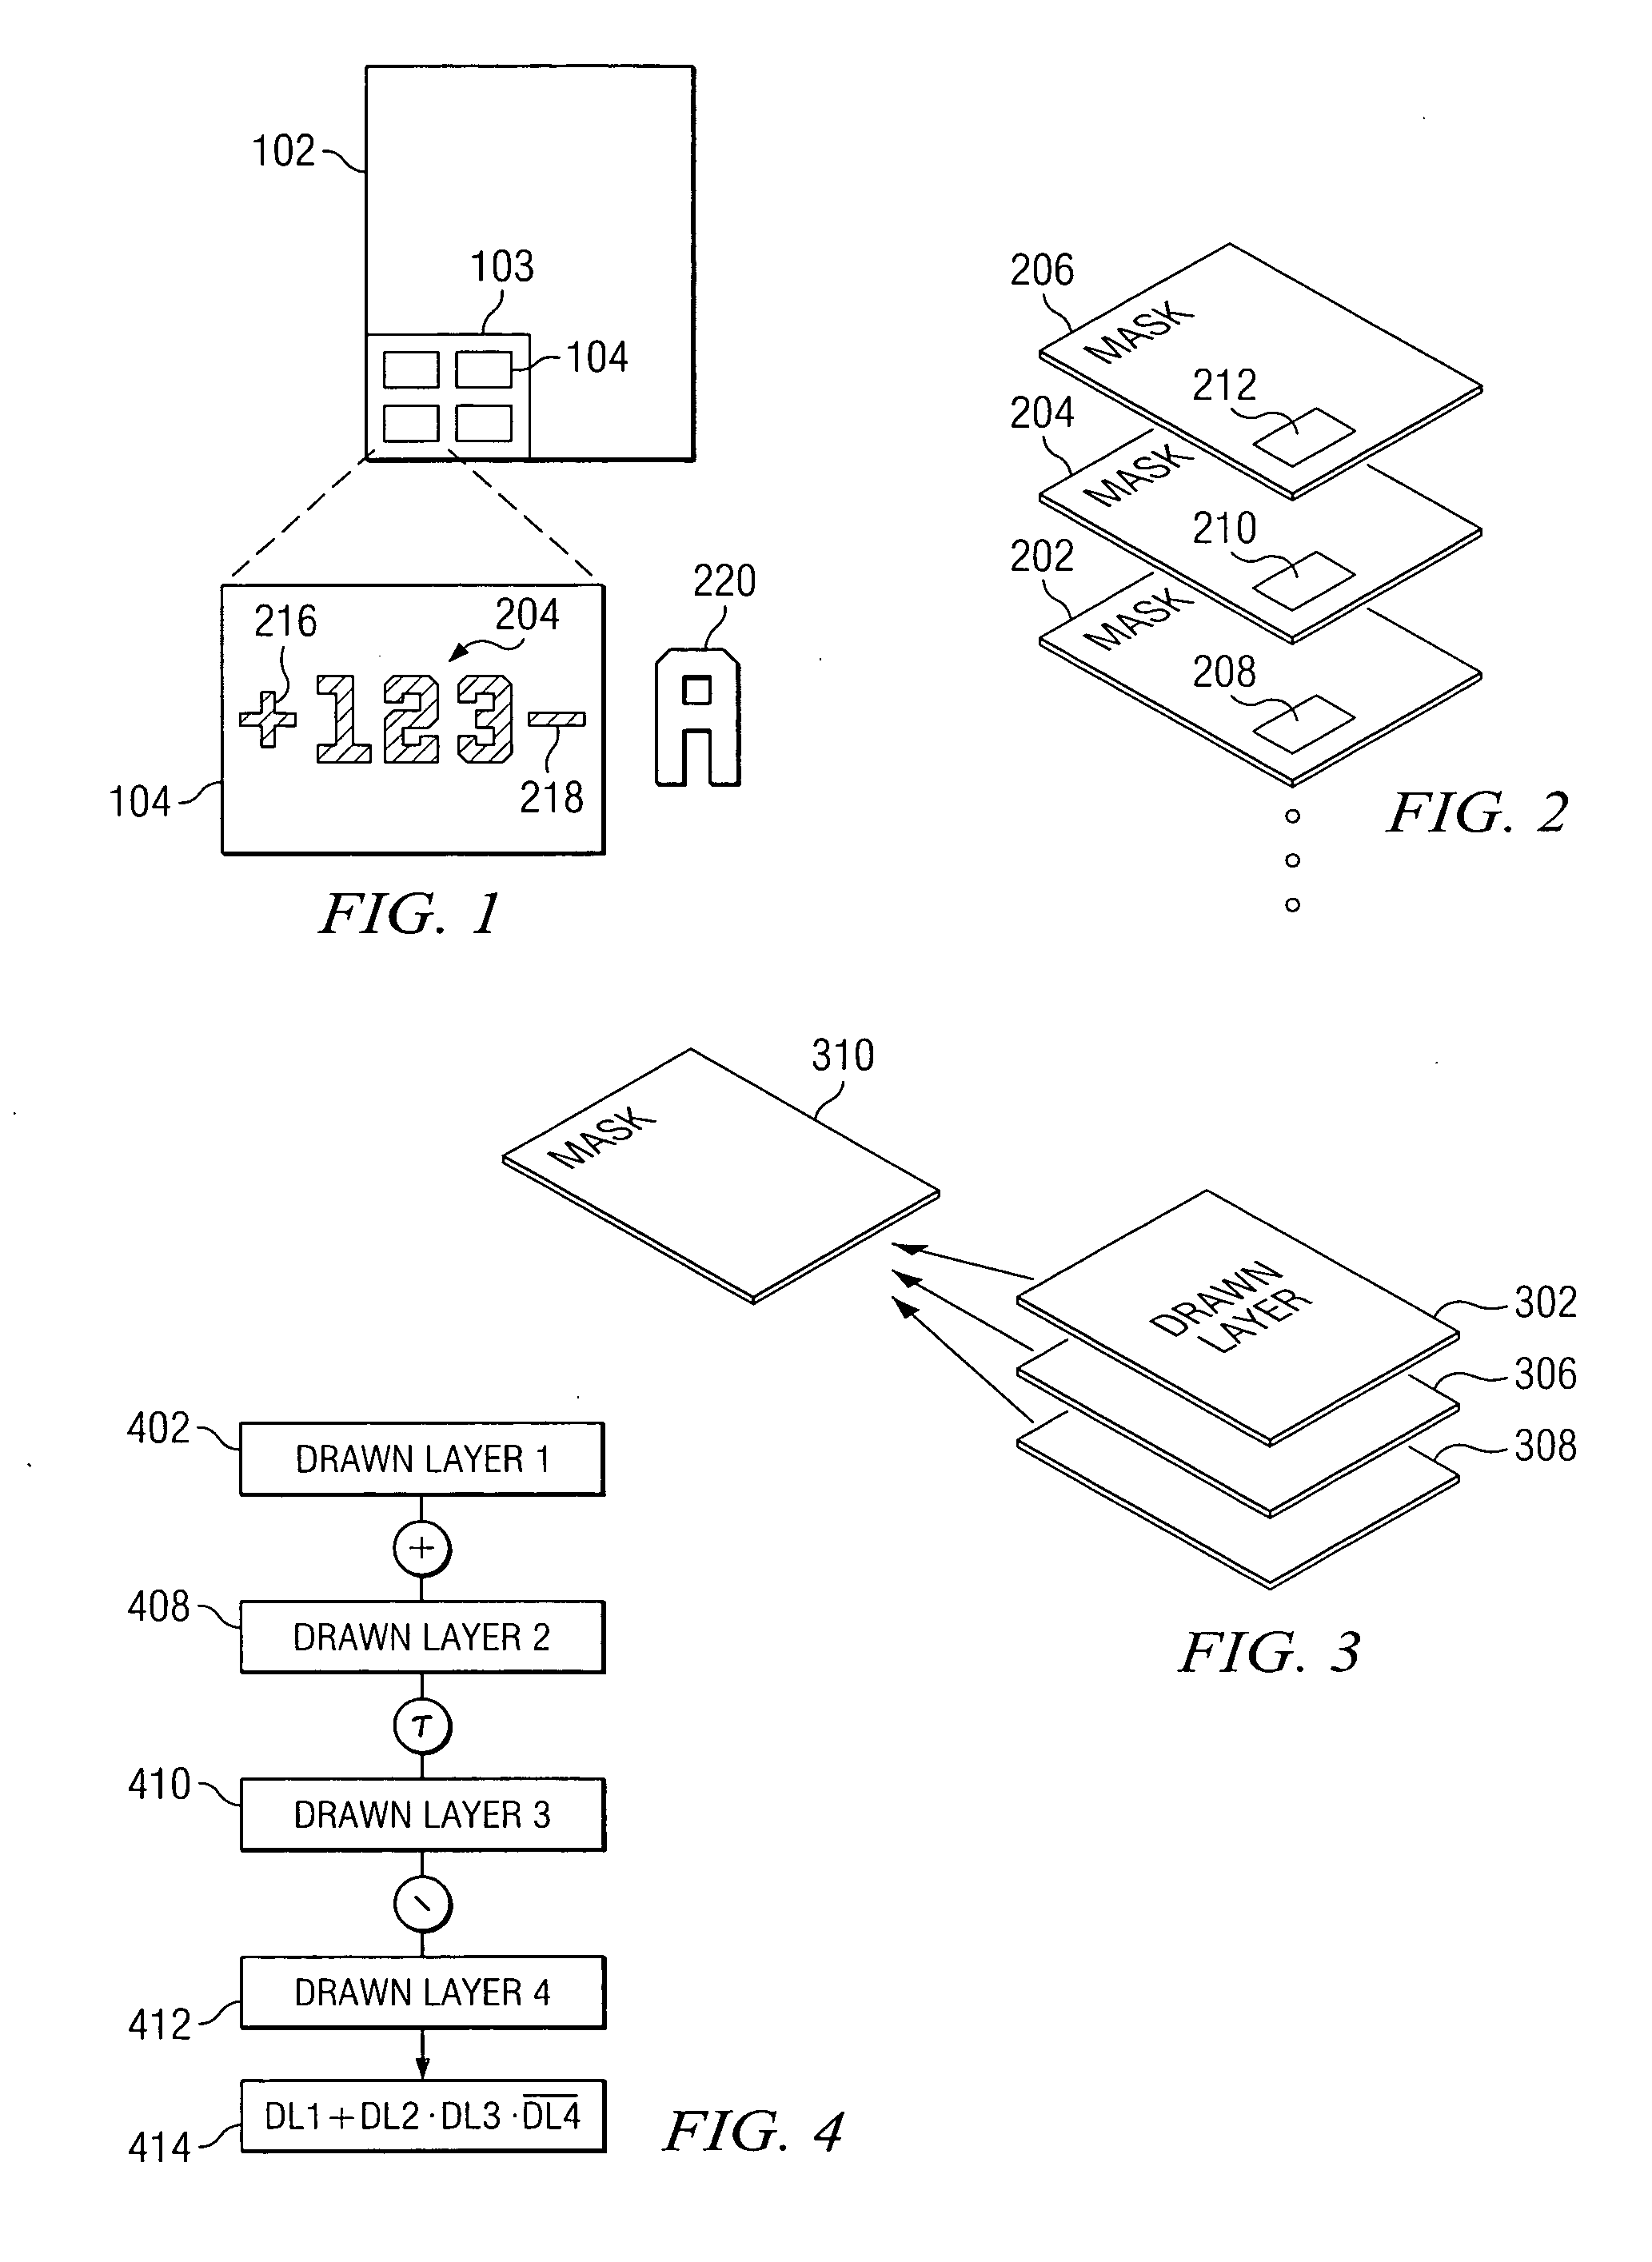 Marking system for a semiconductor wafer to identify problems in mask layers